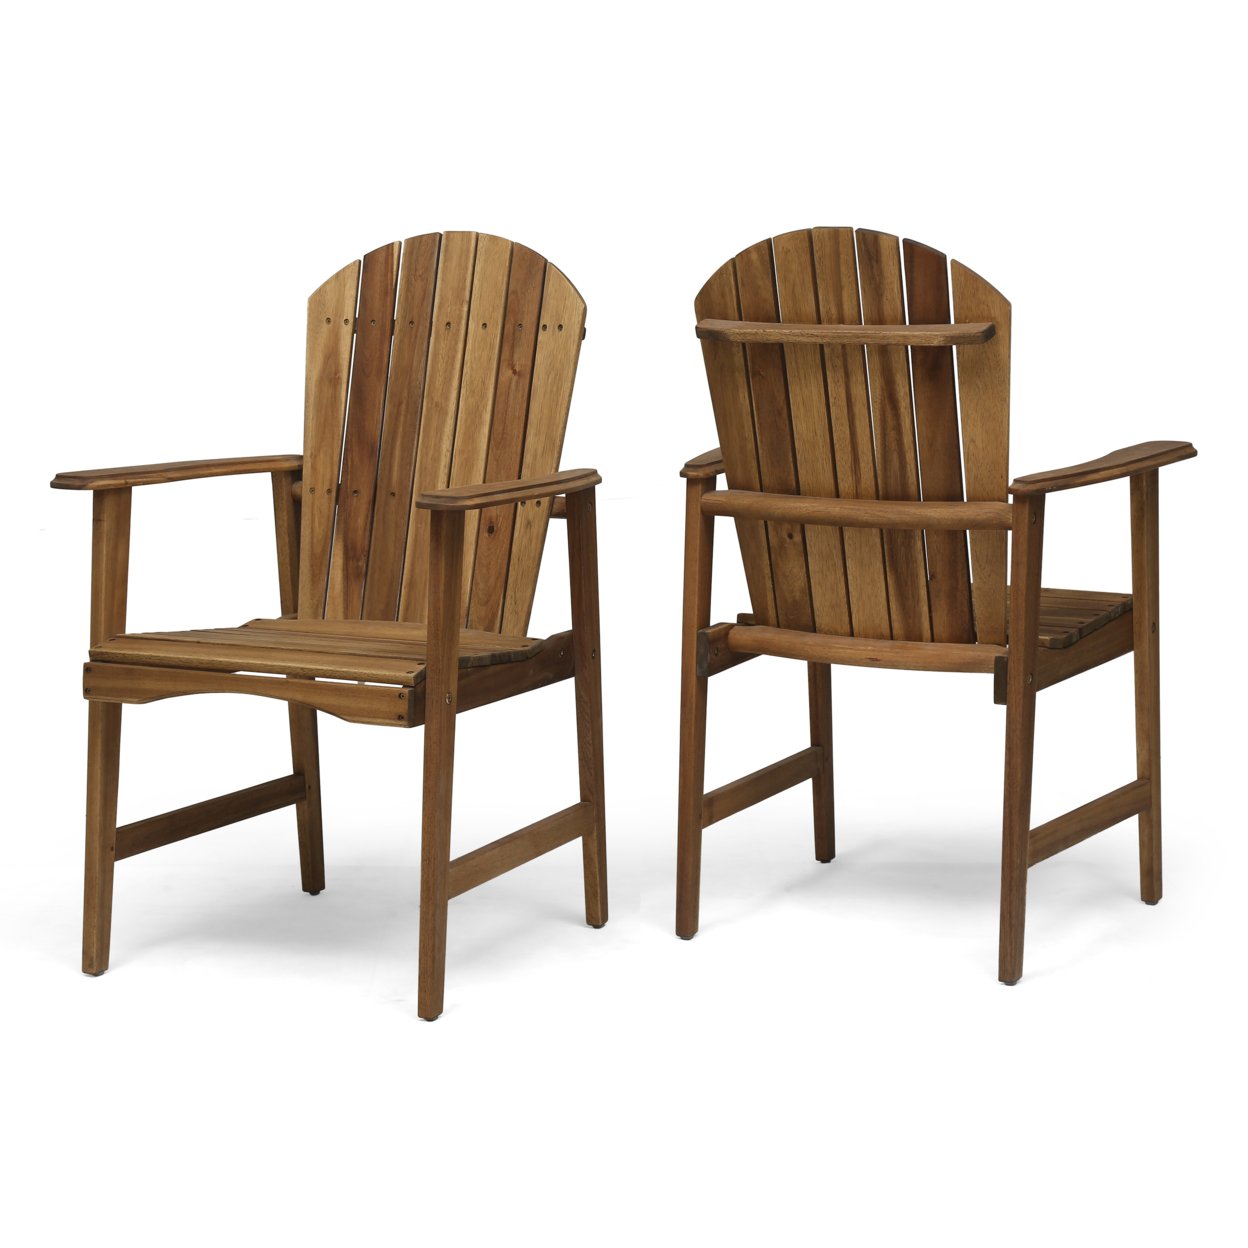 Easter Outdoor Weather Resistant Acacia Wood Adirondack Dining Chairs (Set Of 2) - Natural